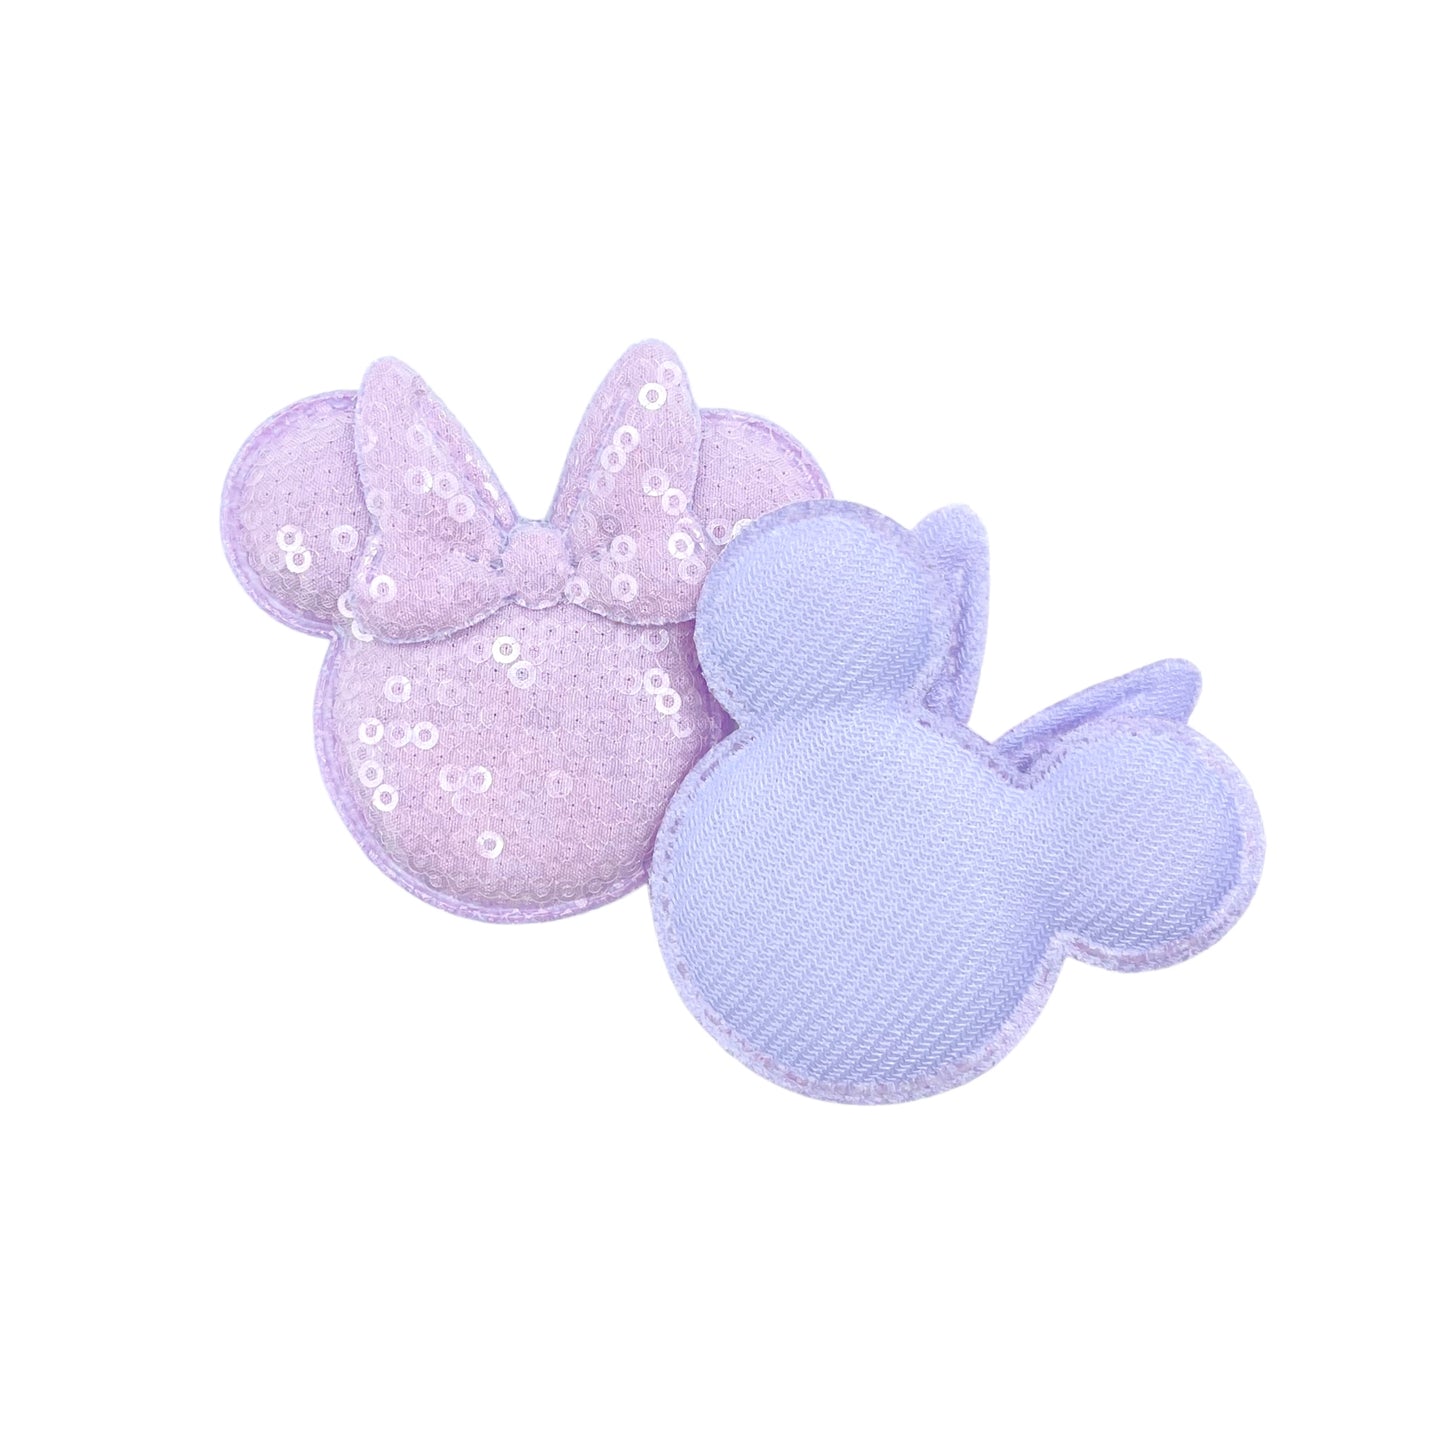 Sequin light purple mouse head with bow embellishment